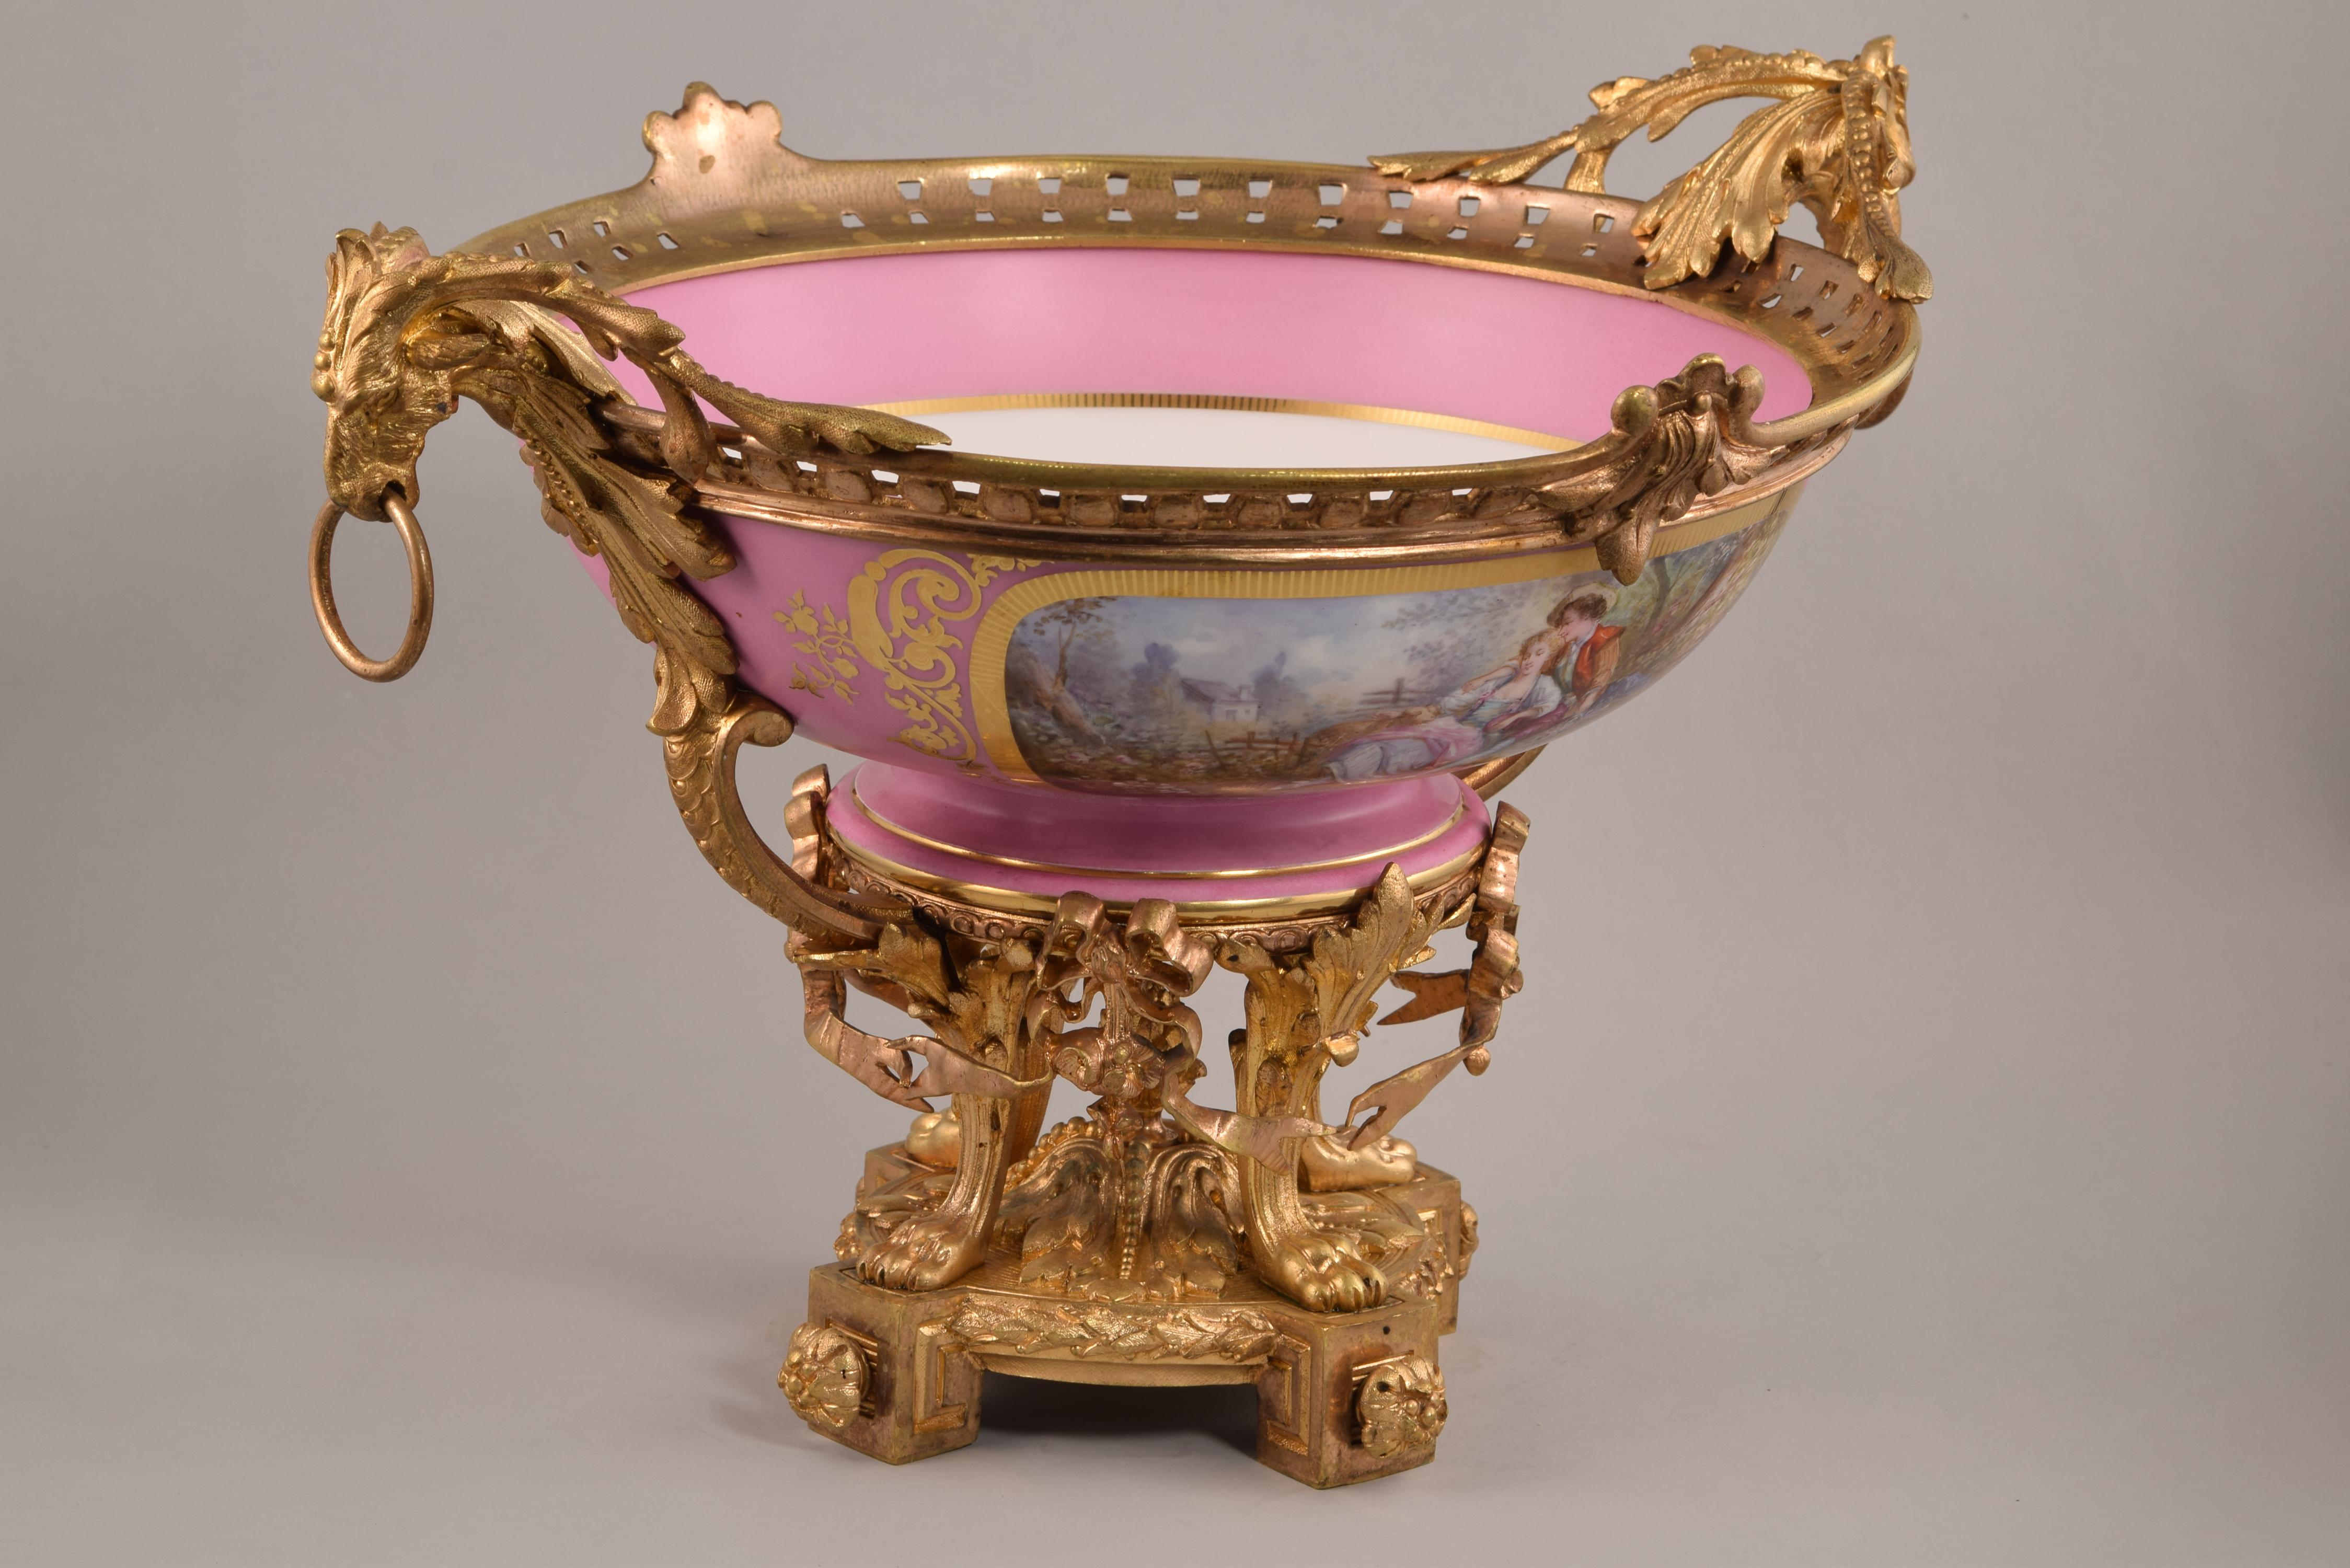 Sèvres porcelain centerpiece. Enameled porcelain and gilt bronze. France, 1885. 
 With markings on the base (porcelain). 
 Centerpiece with porcelain piece enameled in a pink tone, with gilding and figurative scenes, and gilt bronze frame